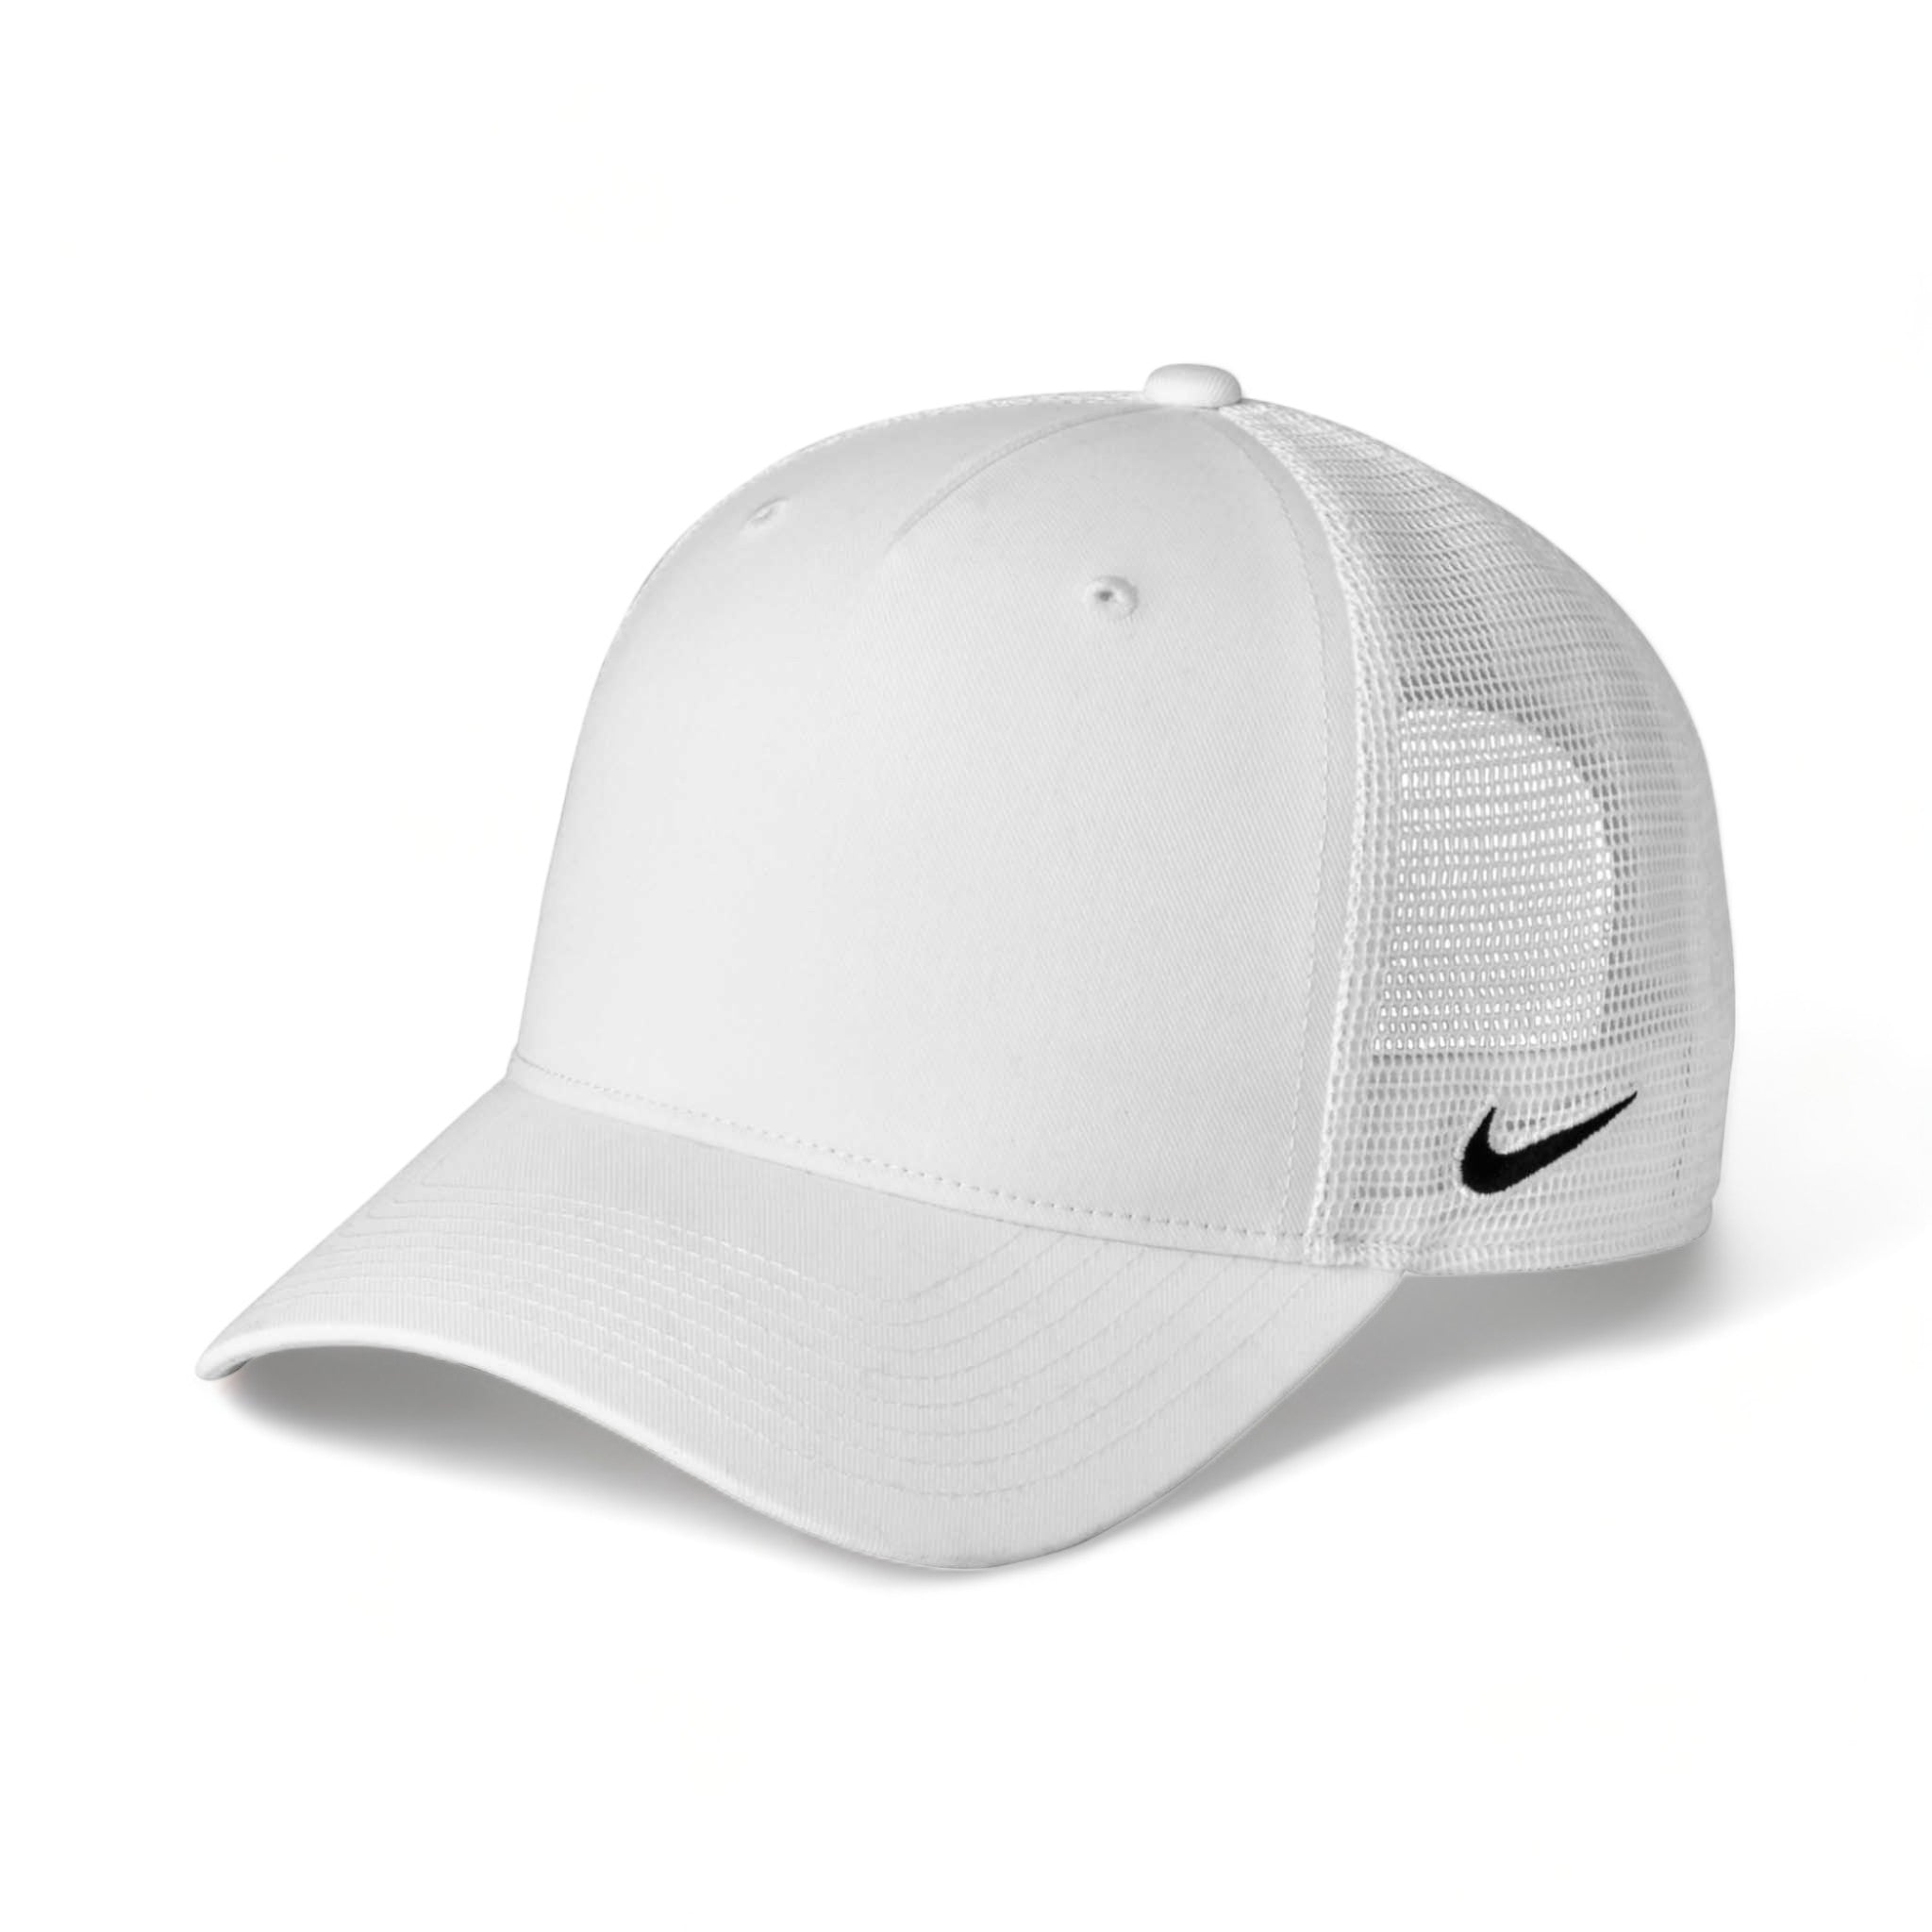 Side view of Nike NKFN9893 custom hat in white and white